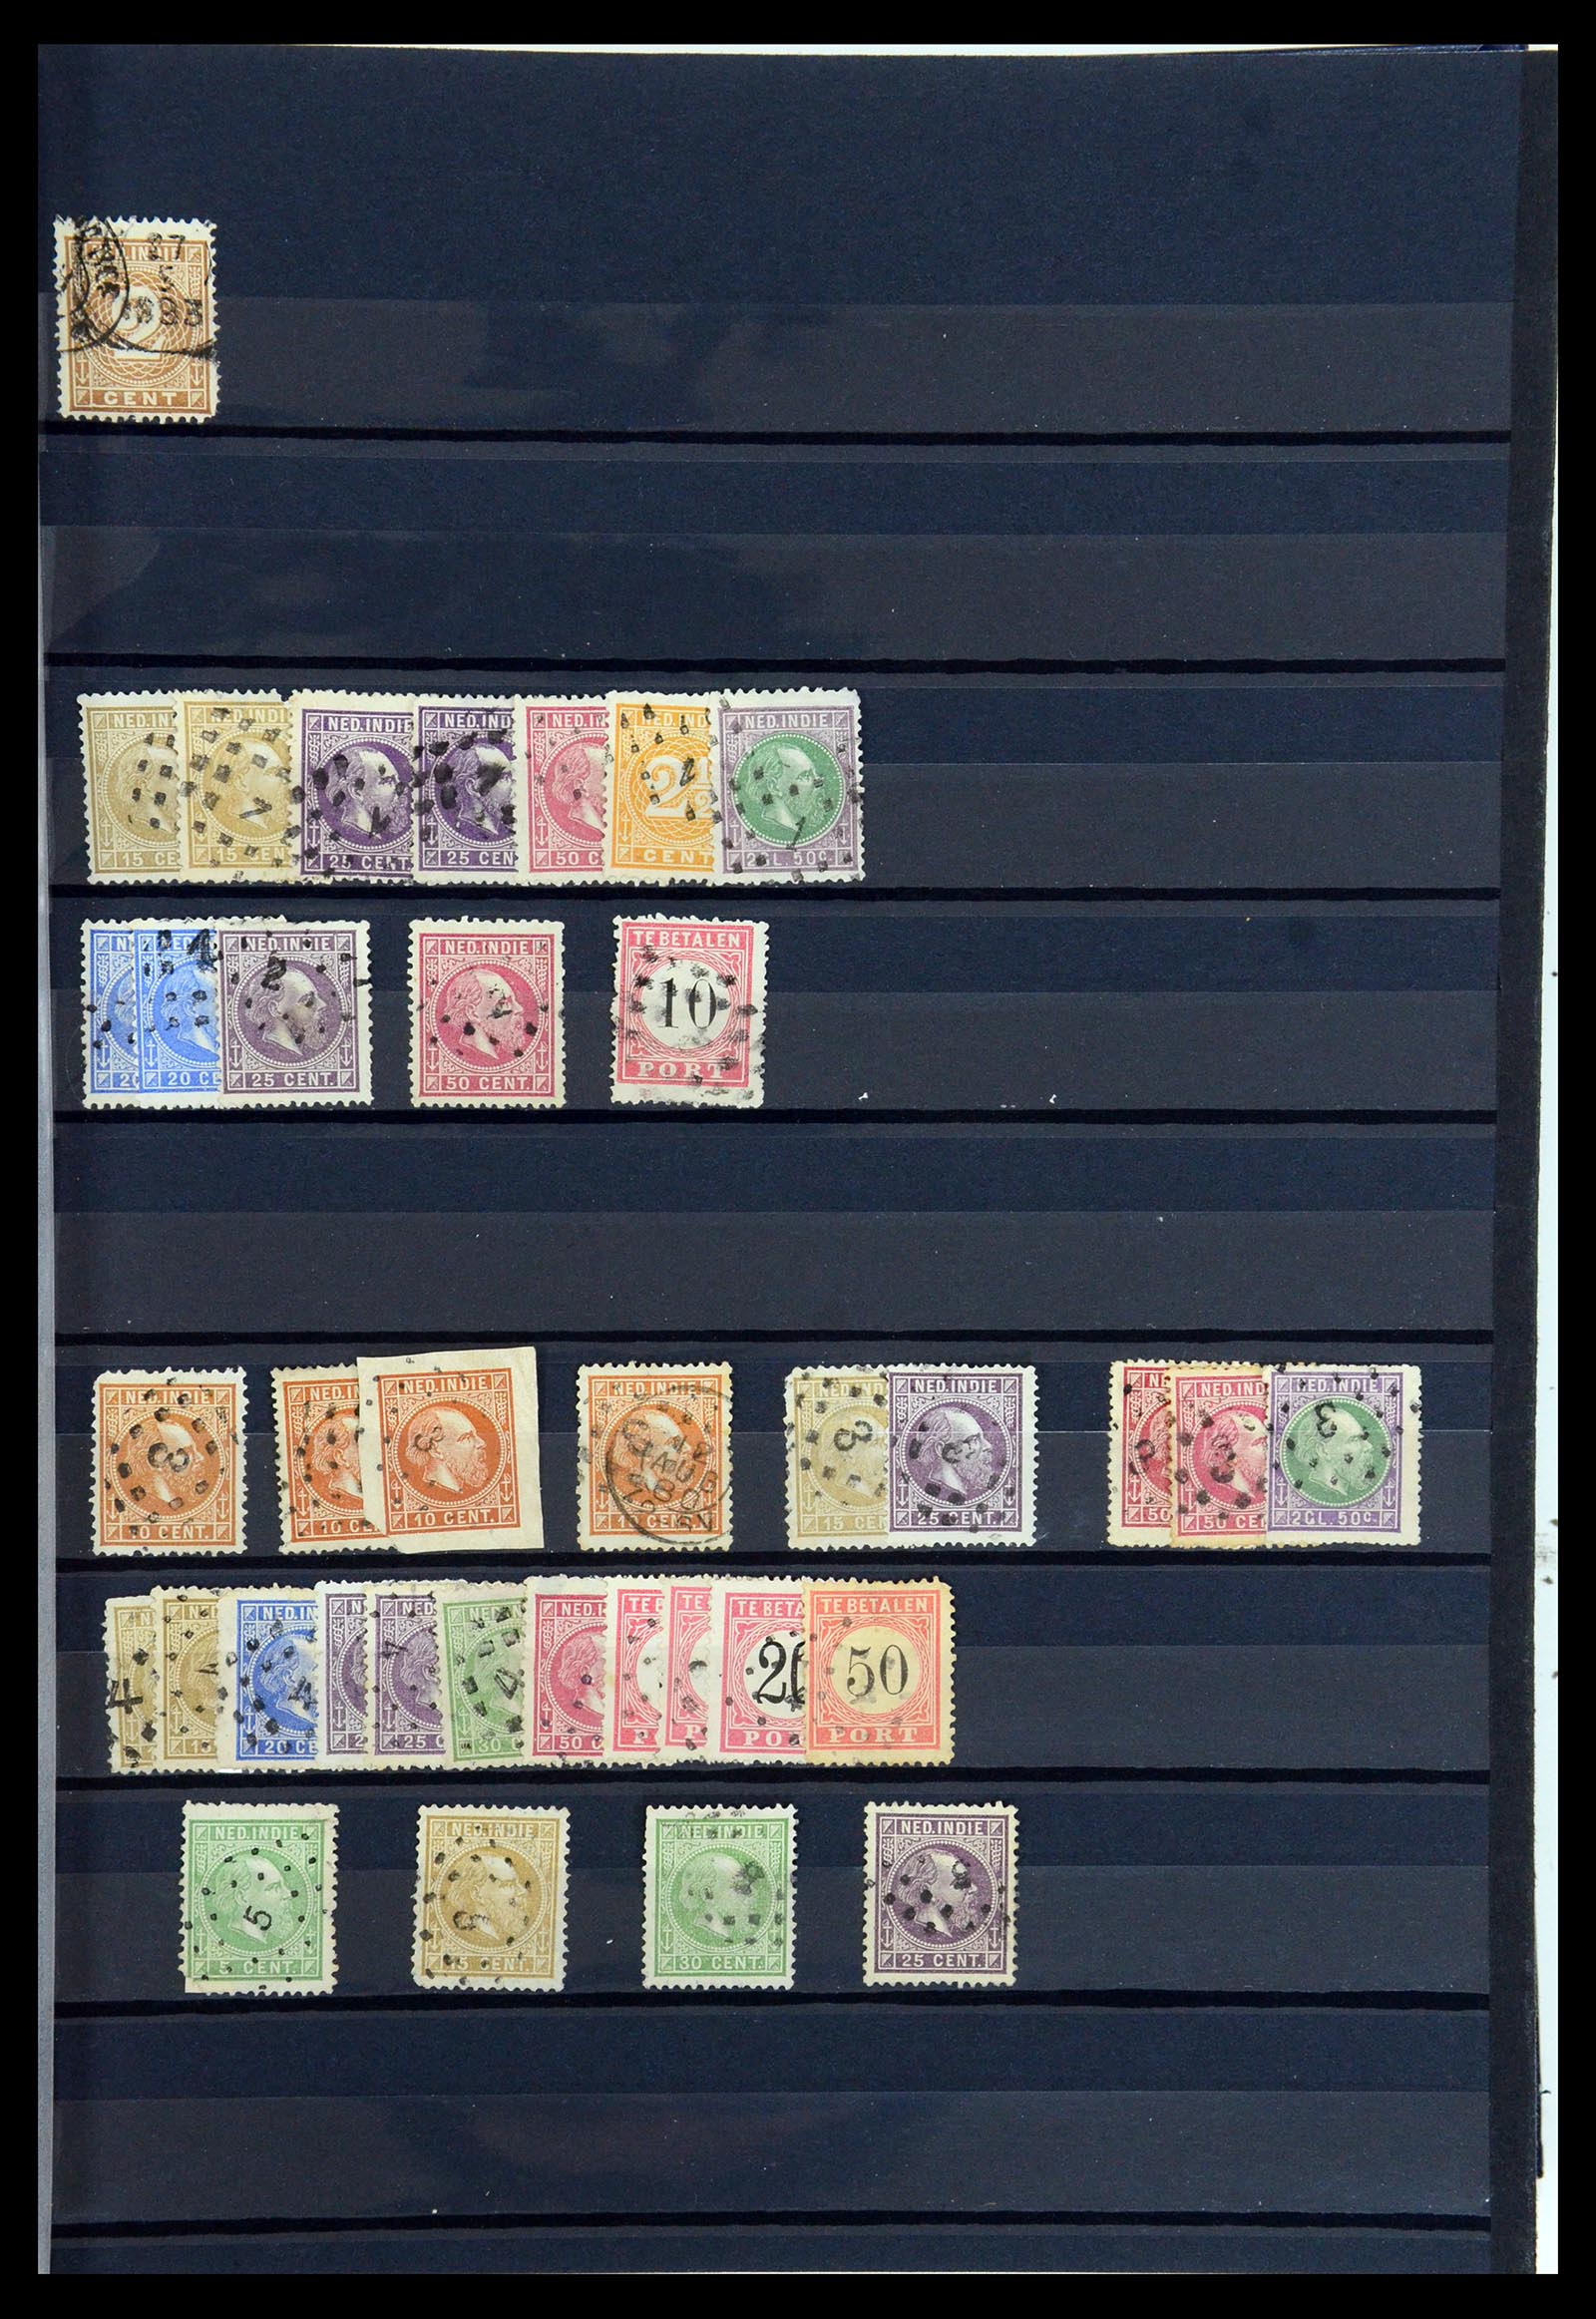 35612 001 - Stamp Collection 35612 Dutch east Indies cancels.